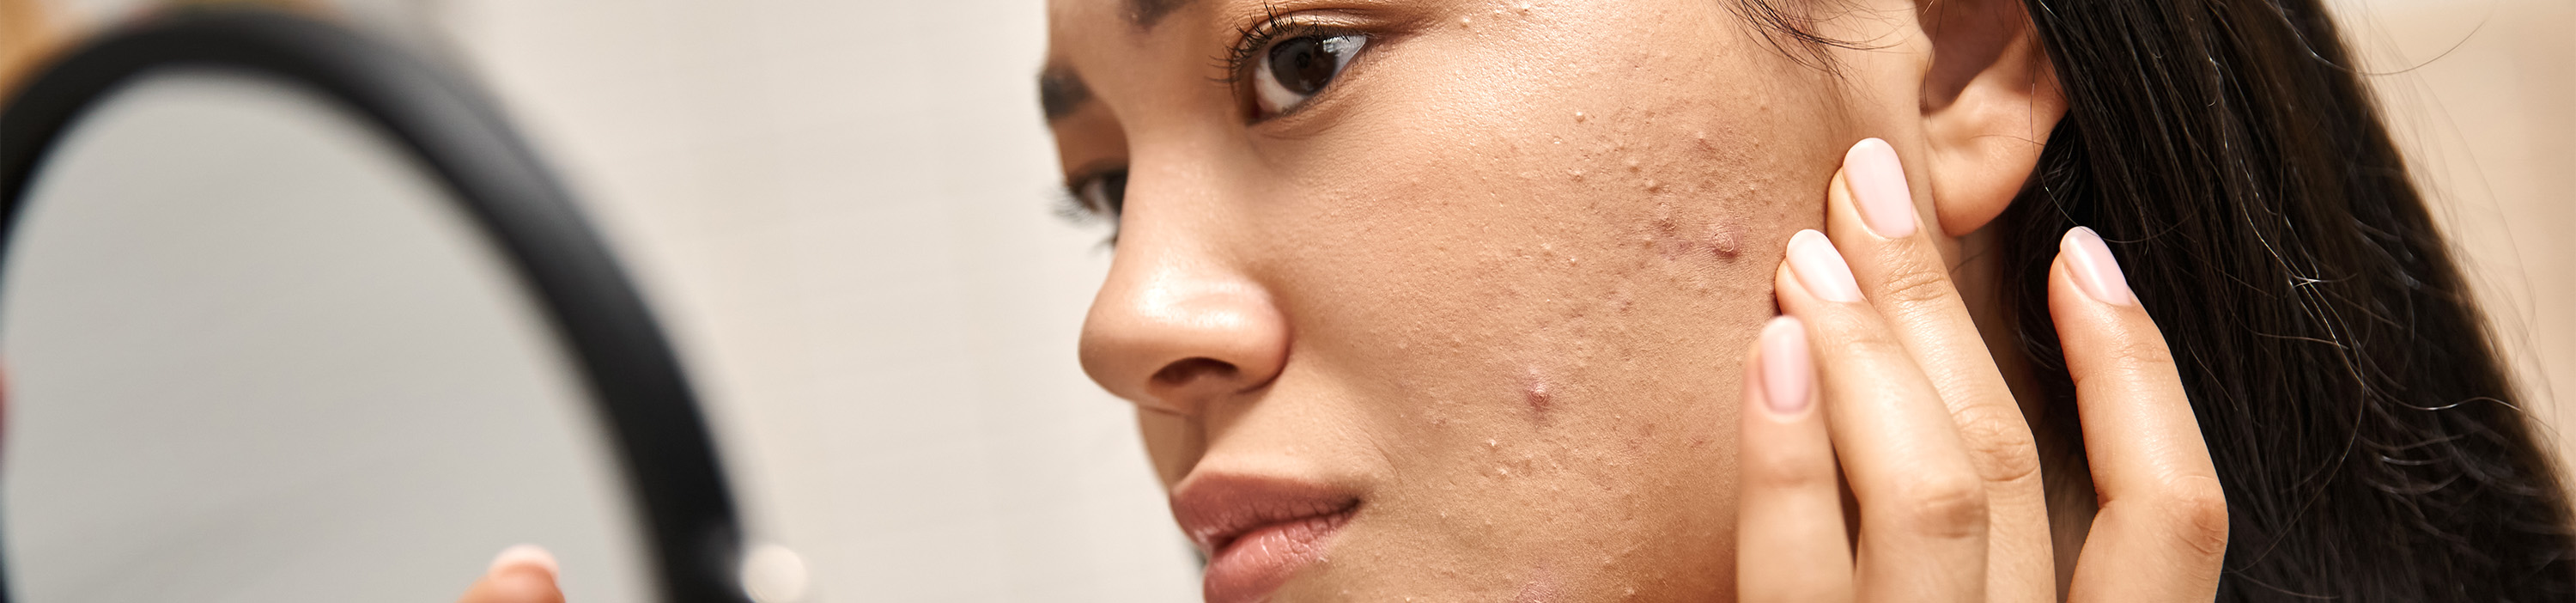 Close-up view of a woman checking her acne-prone skin in the mirror.